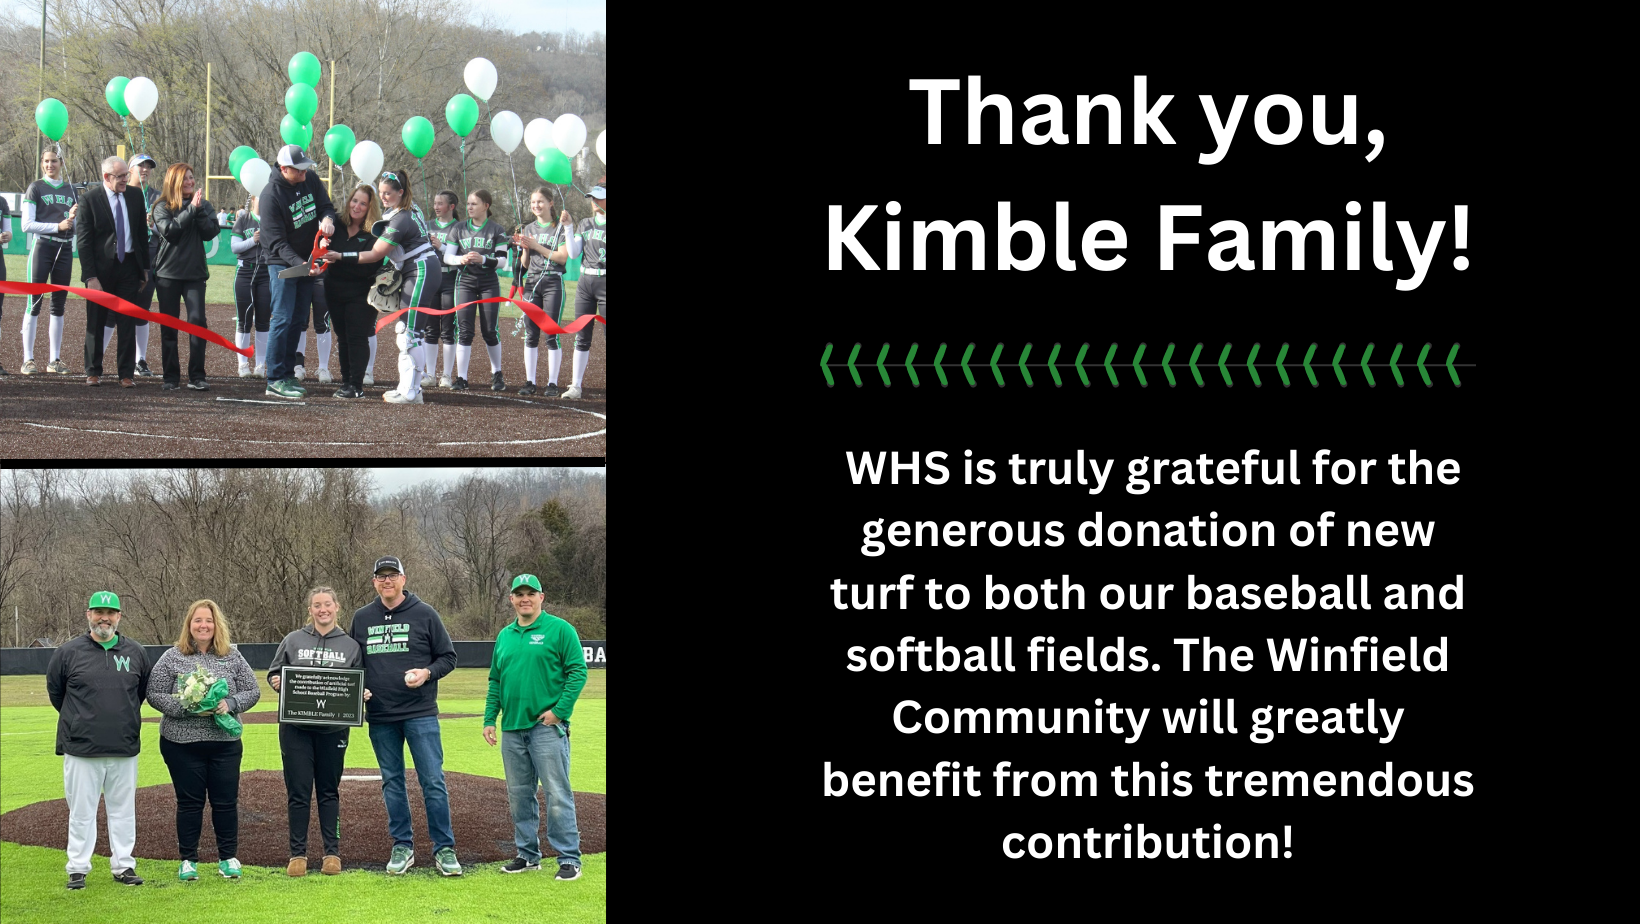 Thank you, Kimble Family! WHS is truly grateful for the generous donation of new turf to both our baseball and softball fields. The Winfield Community will greatly benefit from this tremendous contribution!